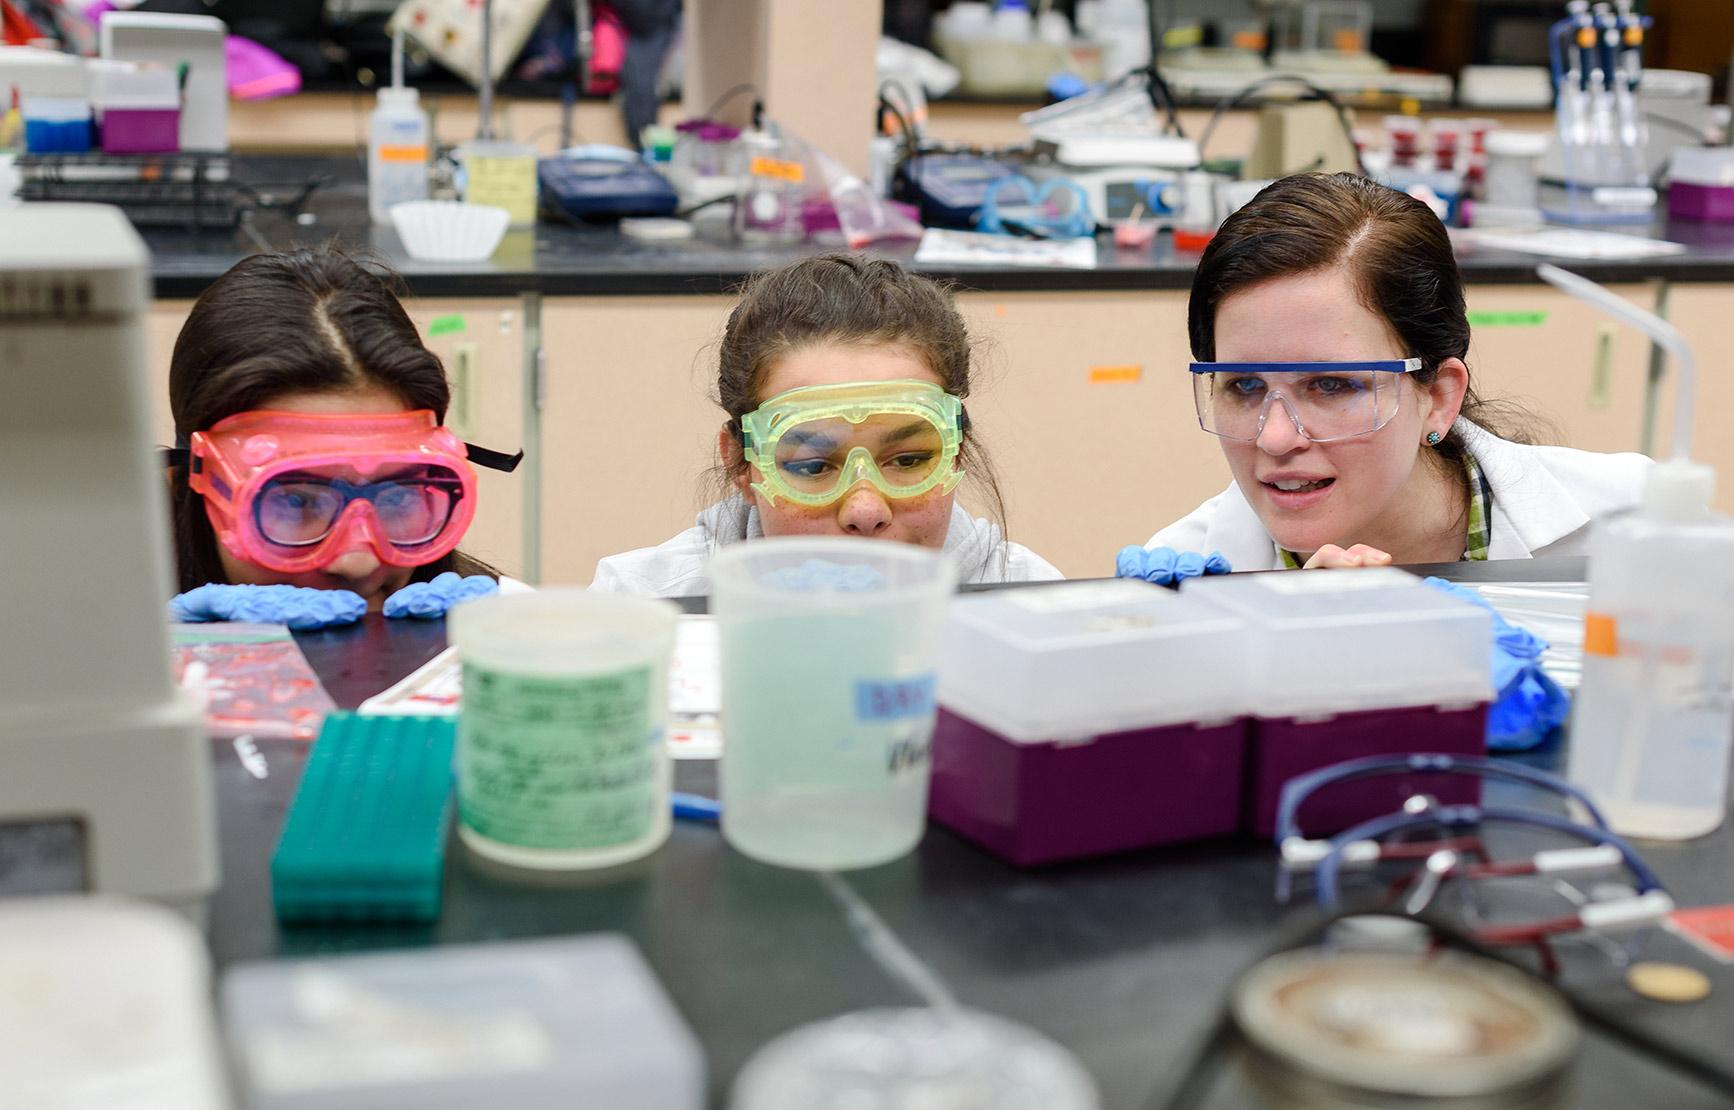 A BB Student and two female middle school students, all crouched in front of a lab experiment.